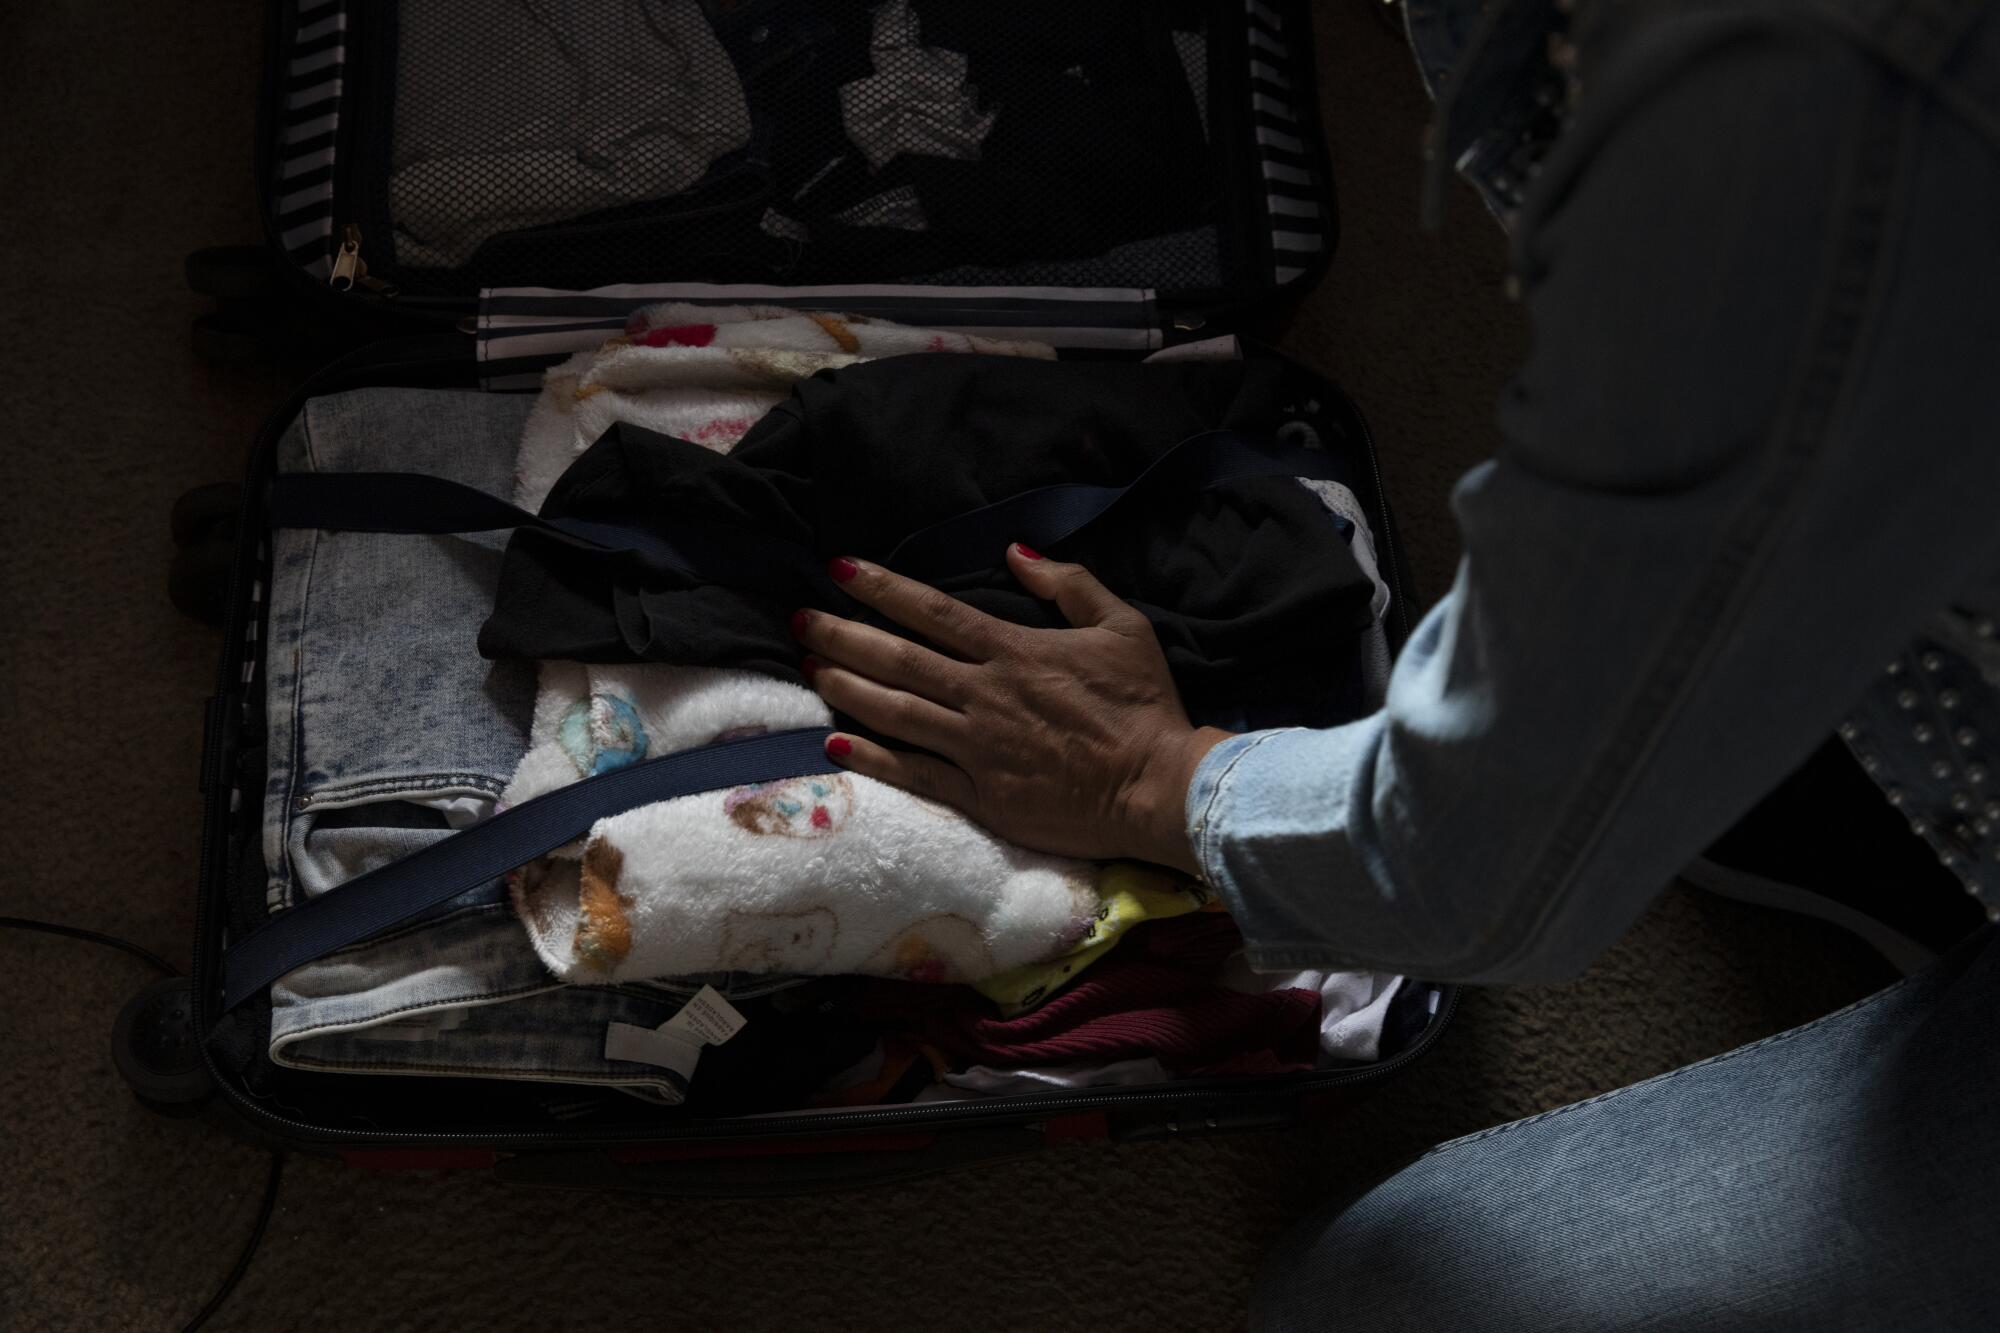 Ceidy Zethare's manicured hand is visible adjusting items in her suitcase